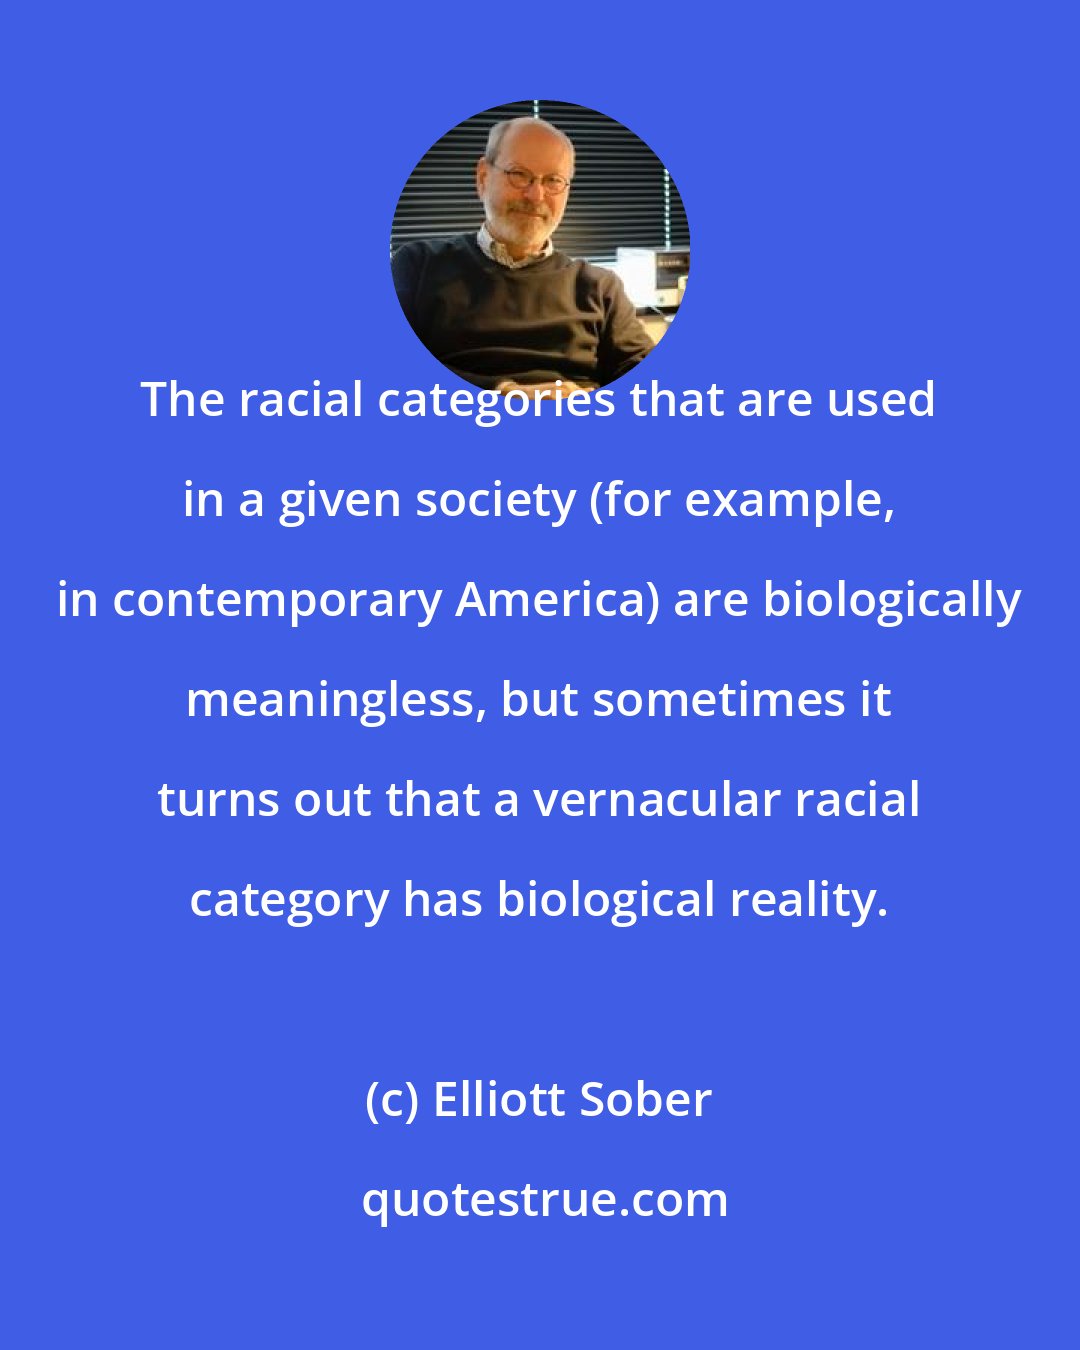 Elliott Sober: The racial categories that are used in a given society (for example, in contemporary America) are biologically meaningless, but sometimes it turns out that a vernacular racial category has biological reality.